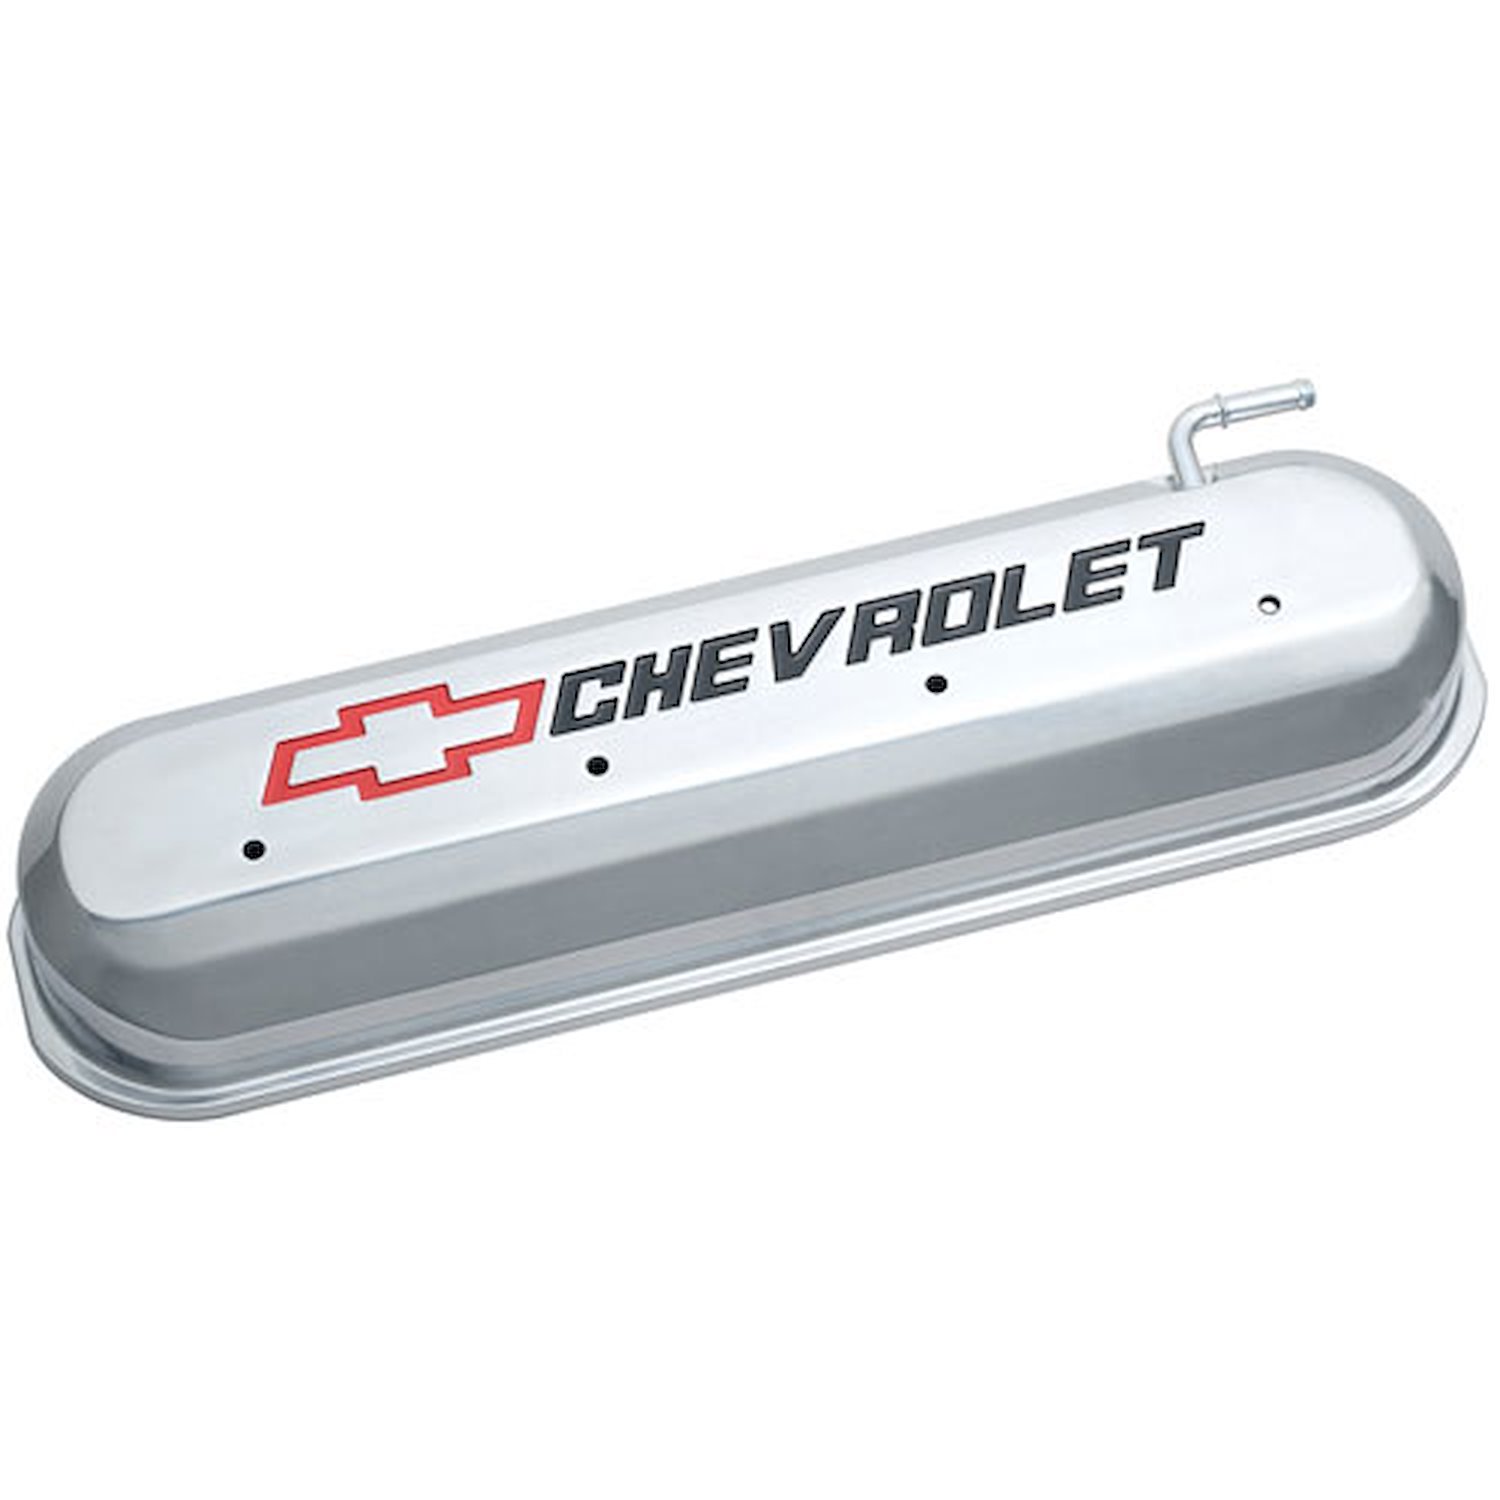 141-264 Die-Cast Slant-Edge Valve Covers for GM Gen III/IV LS Engines w/Recessed Black, Red Chevrolet Logo [Polished]